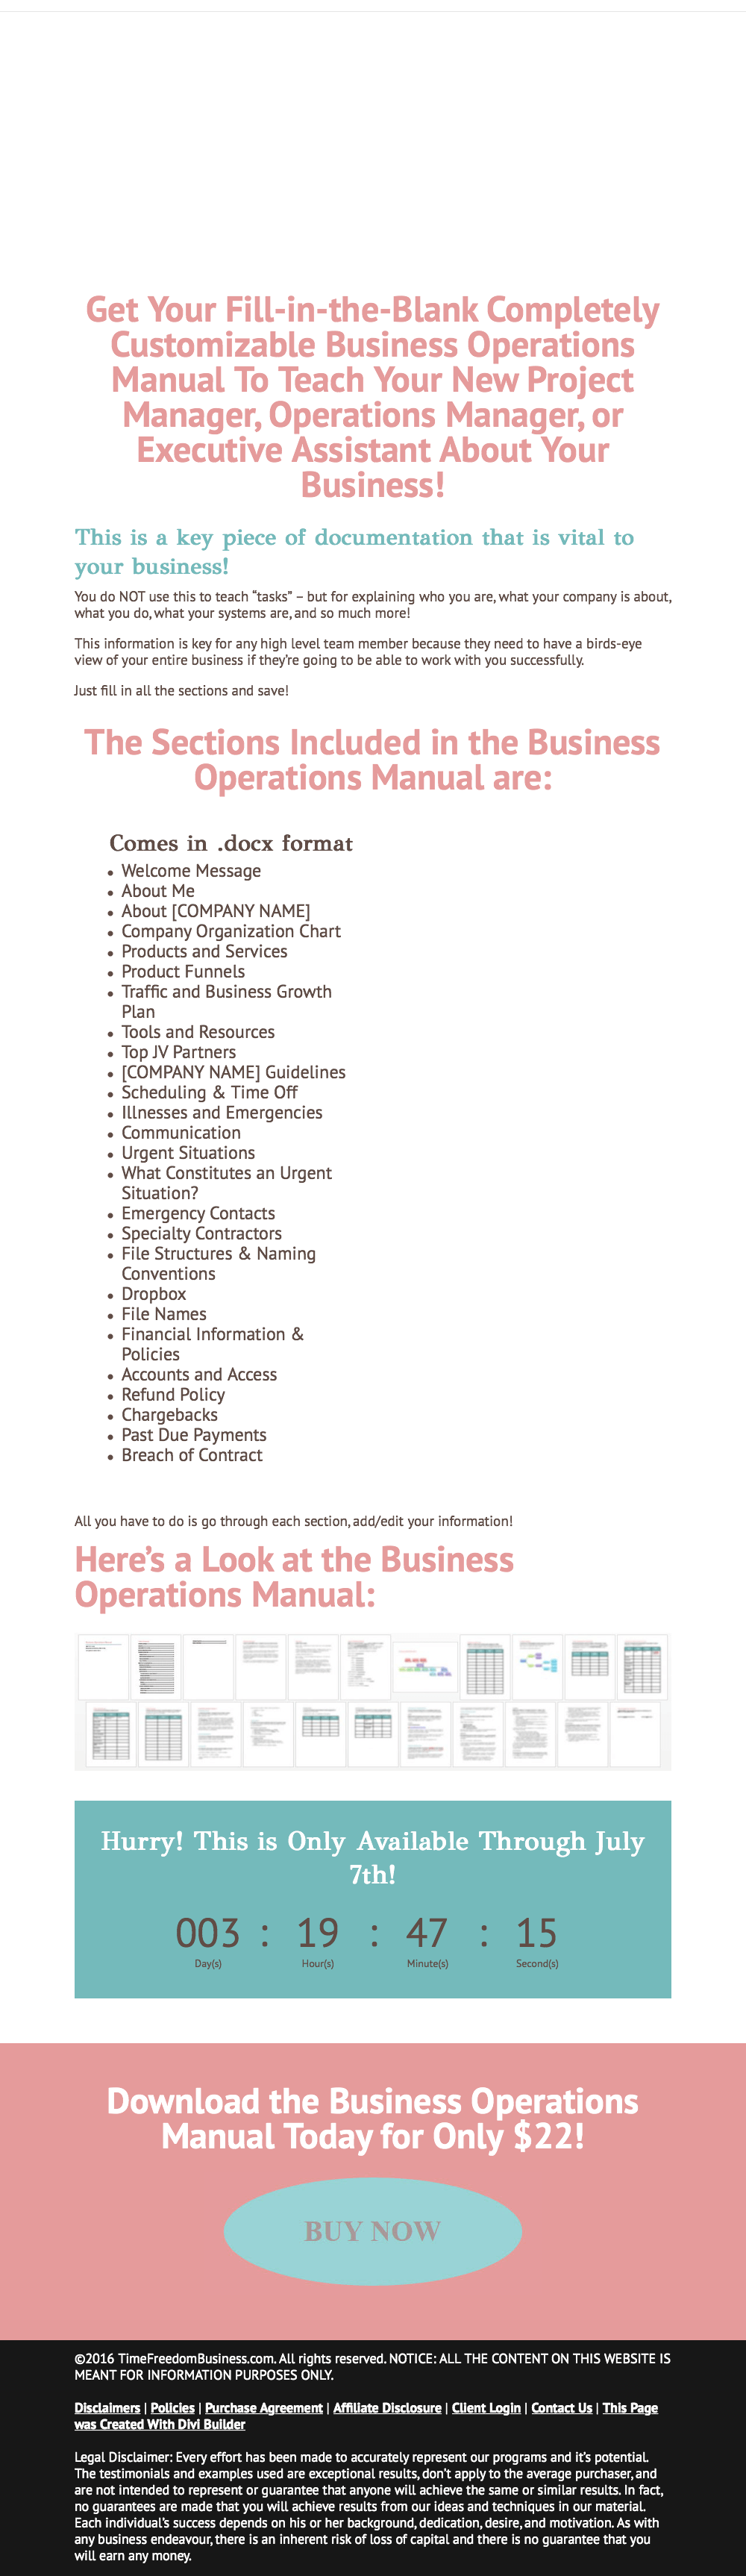 Your Business Operations Manual